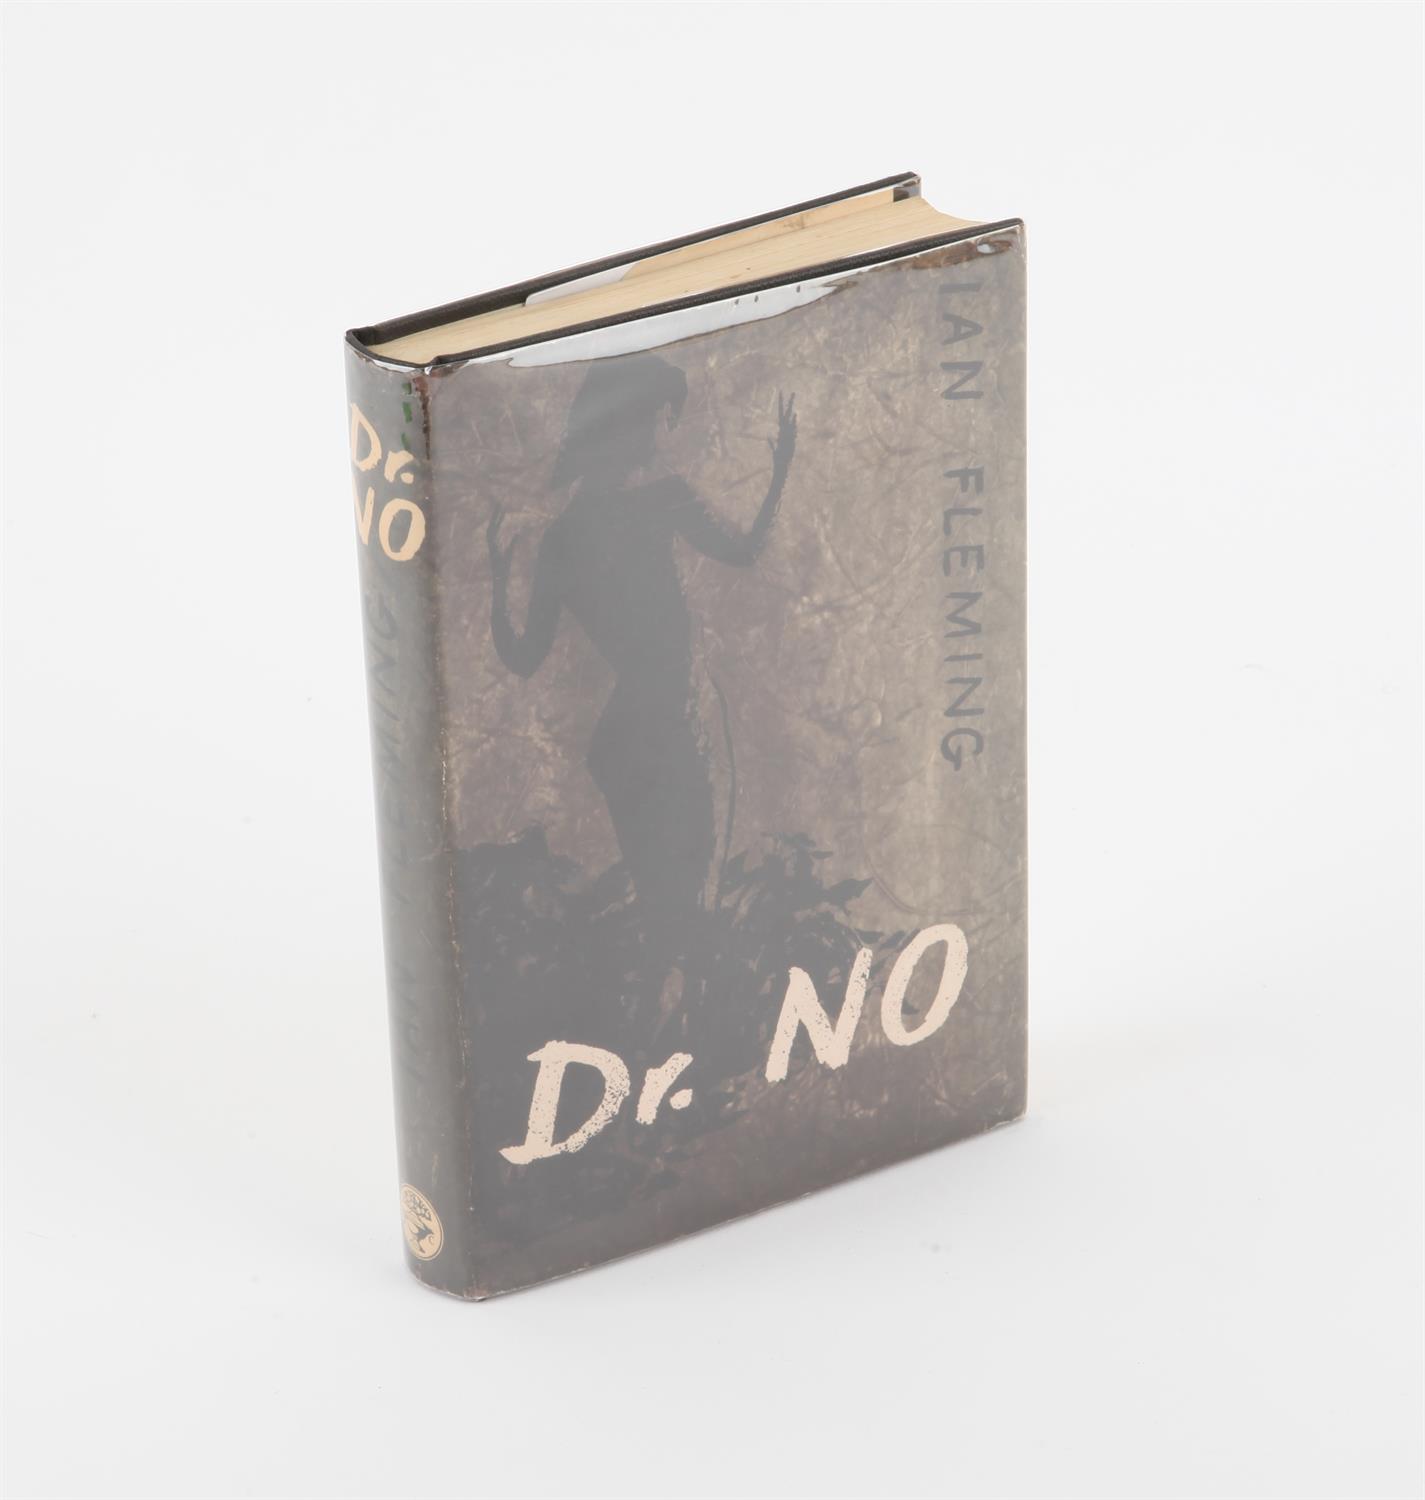 James Bond Dr. No - Ian Fleming Hardback First Edition book with dust jacket, published by Jonathan